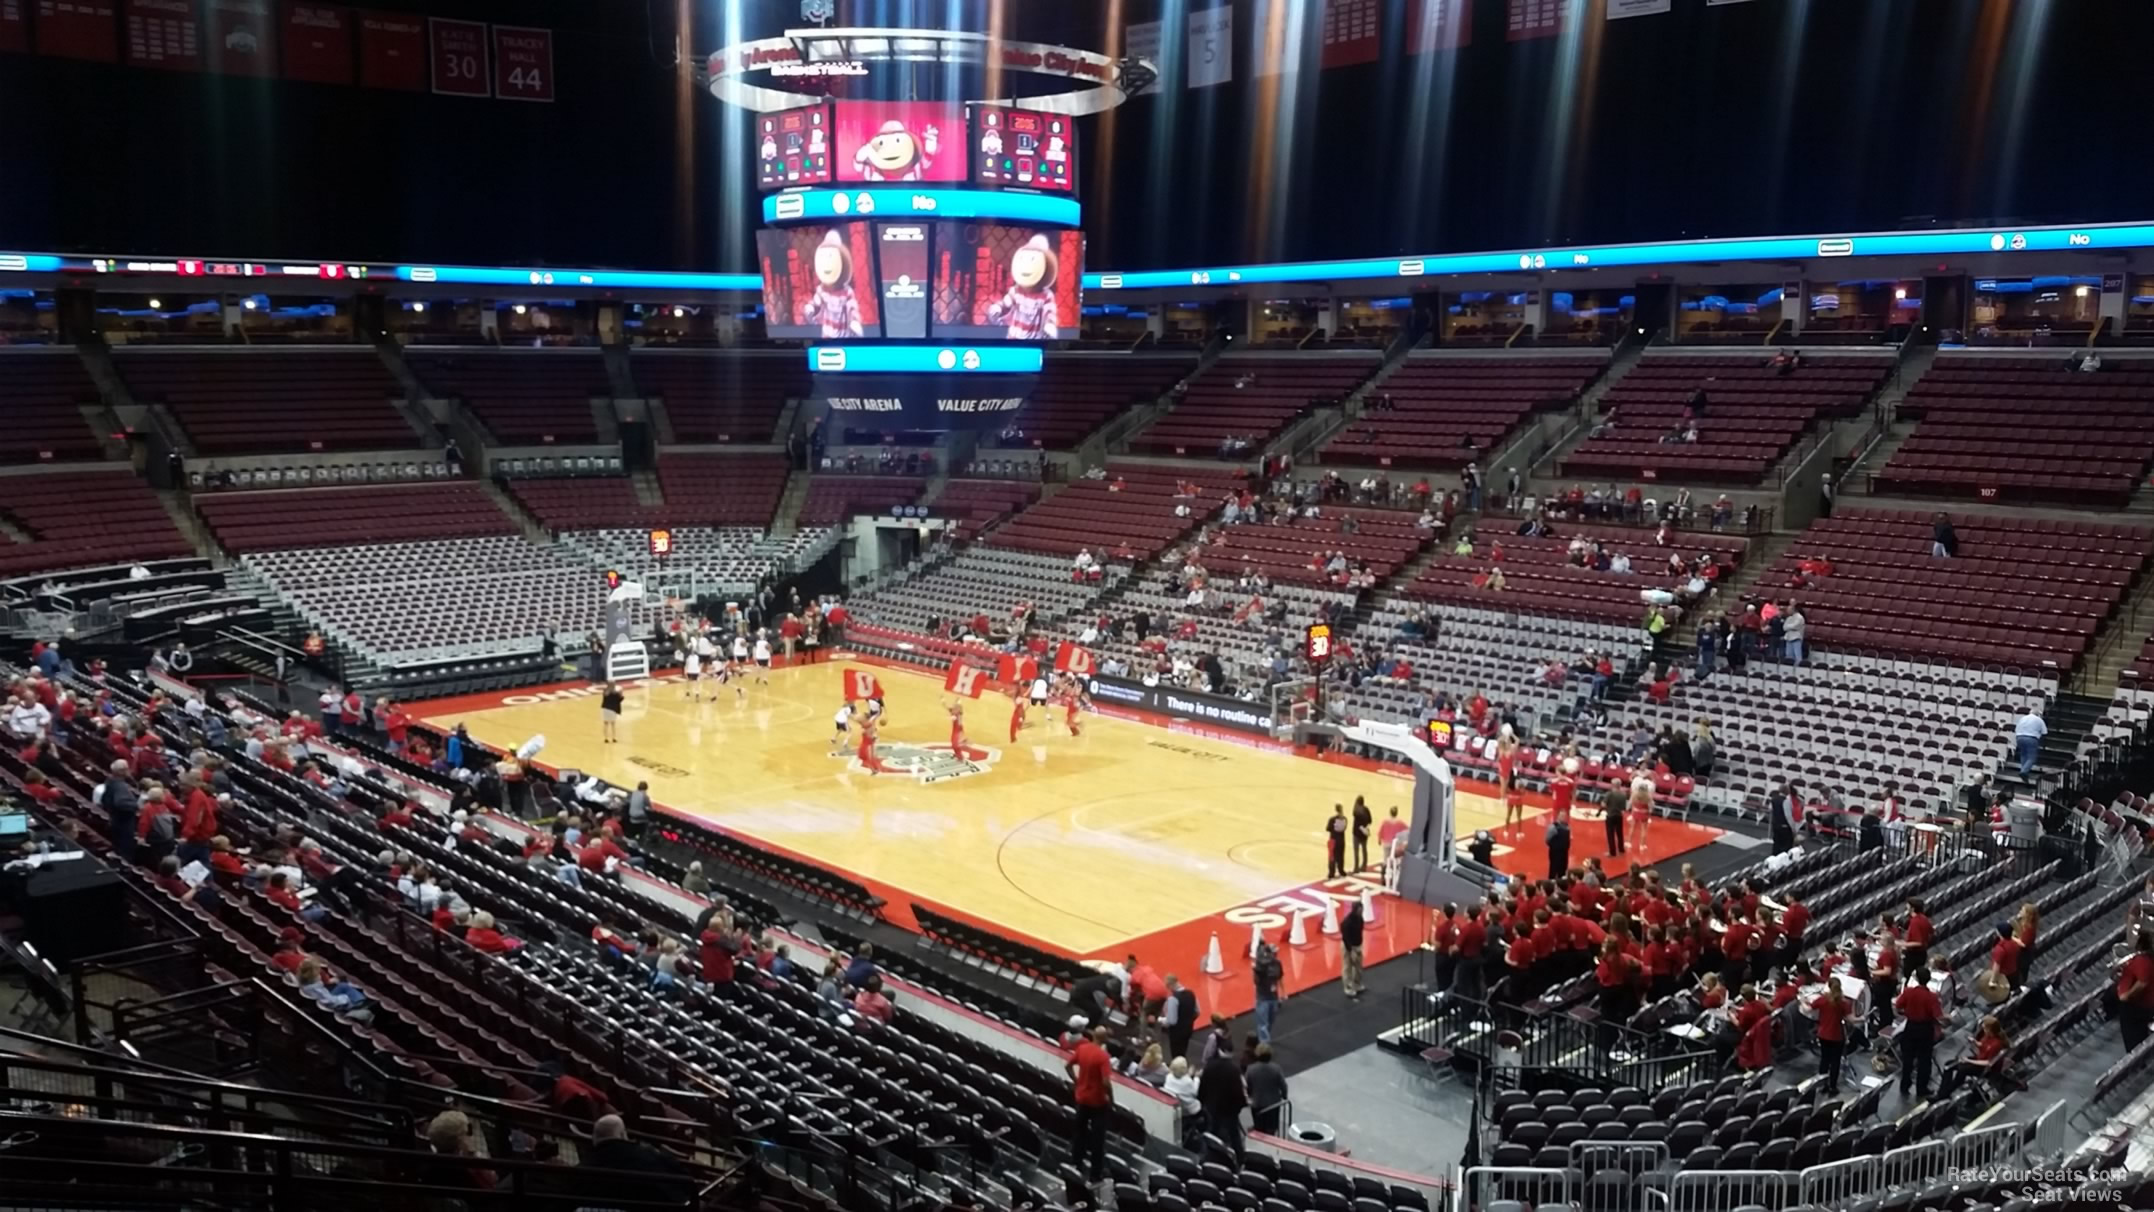 section 218, row h seat view  for basketball - schottenstein center